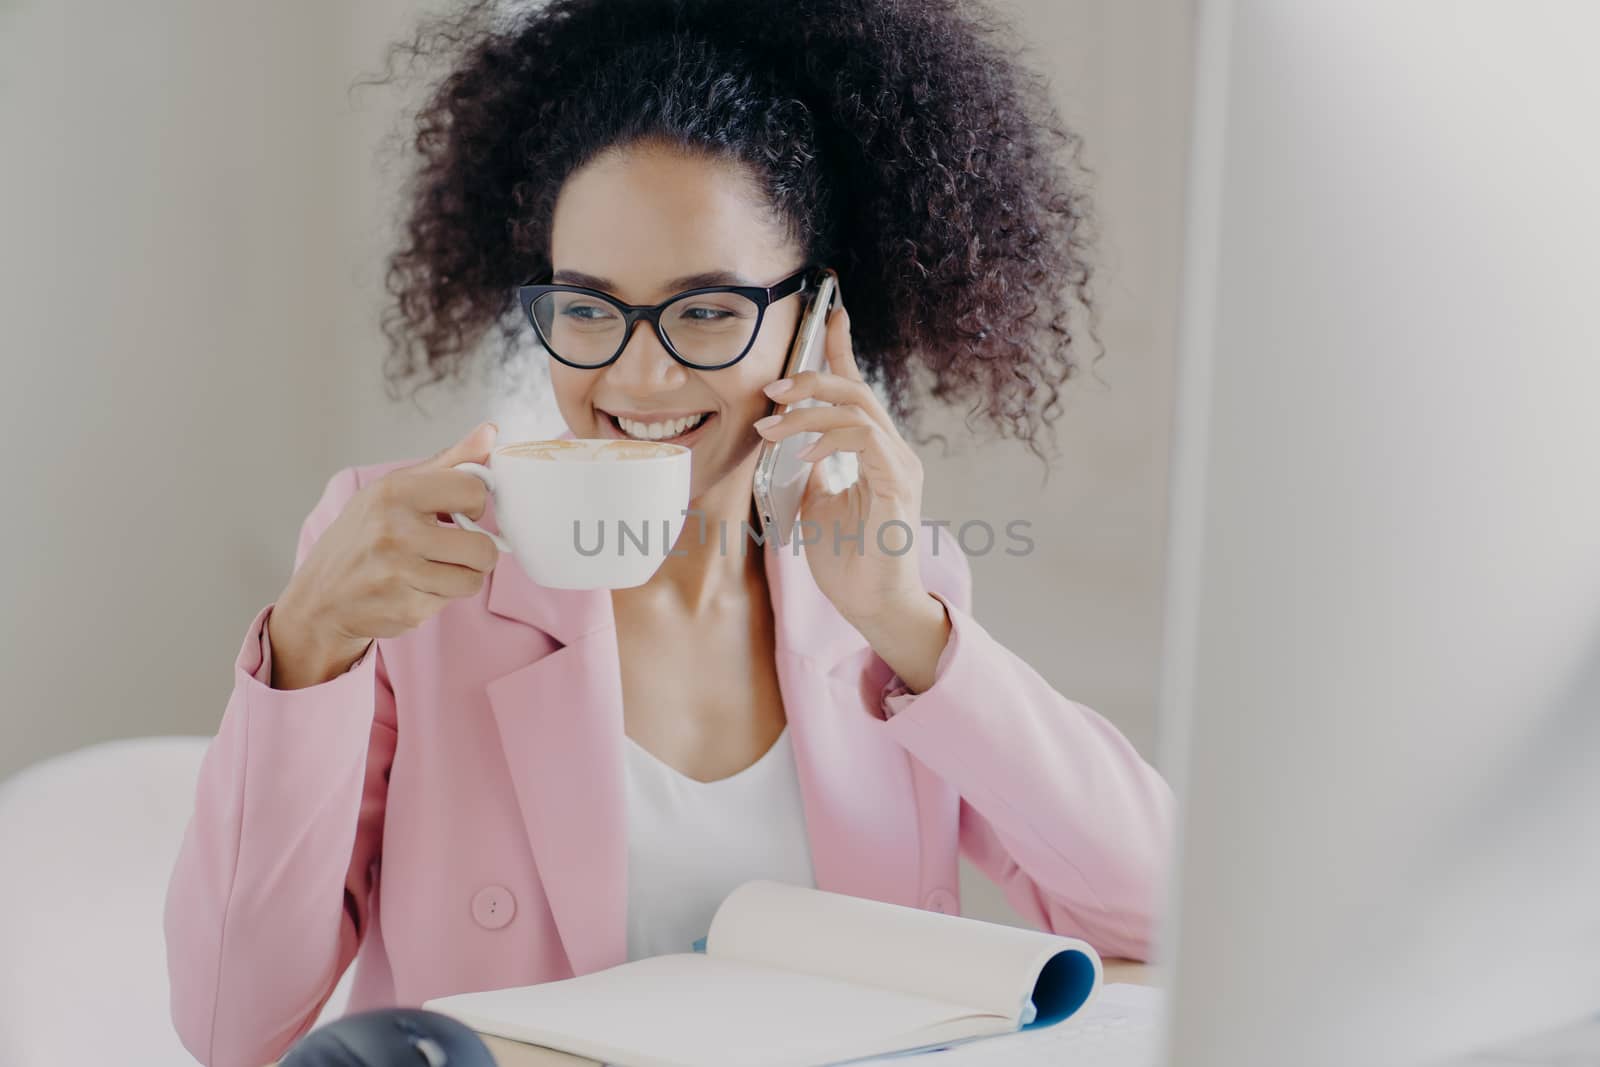 Cropped image of happy young African American woman makes phone call, drinks aromatic latte or espresso, poses in office interior, has pleasant smile wears optical glasses and rosy formal jacket